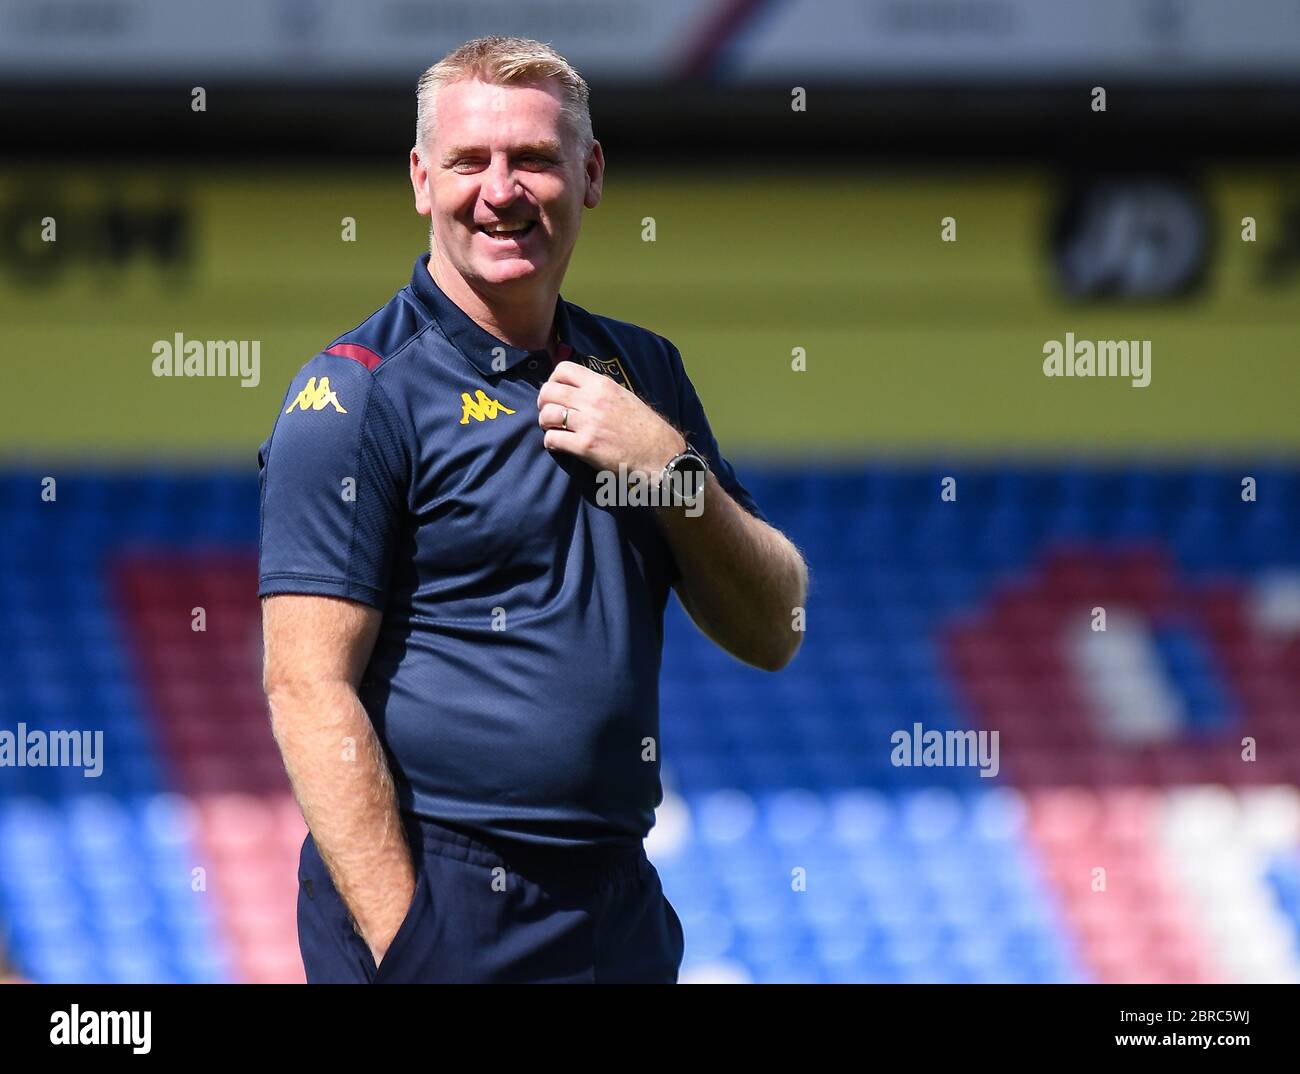 LONDON, ENGLAND - AUGUST 31, 2019: Villa manager Dean Smith pictured ahead of  the 2019/20 Premier League game between Crystal Palace FC and Aston Villa FC at Selhurst Park. Stock Photo